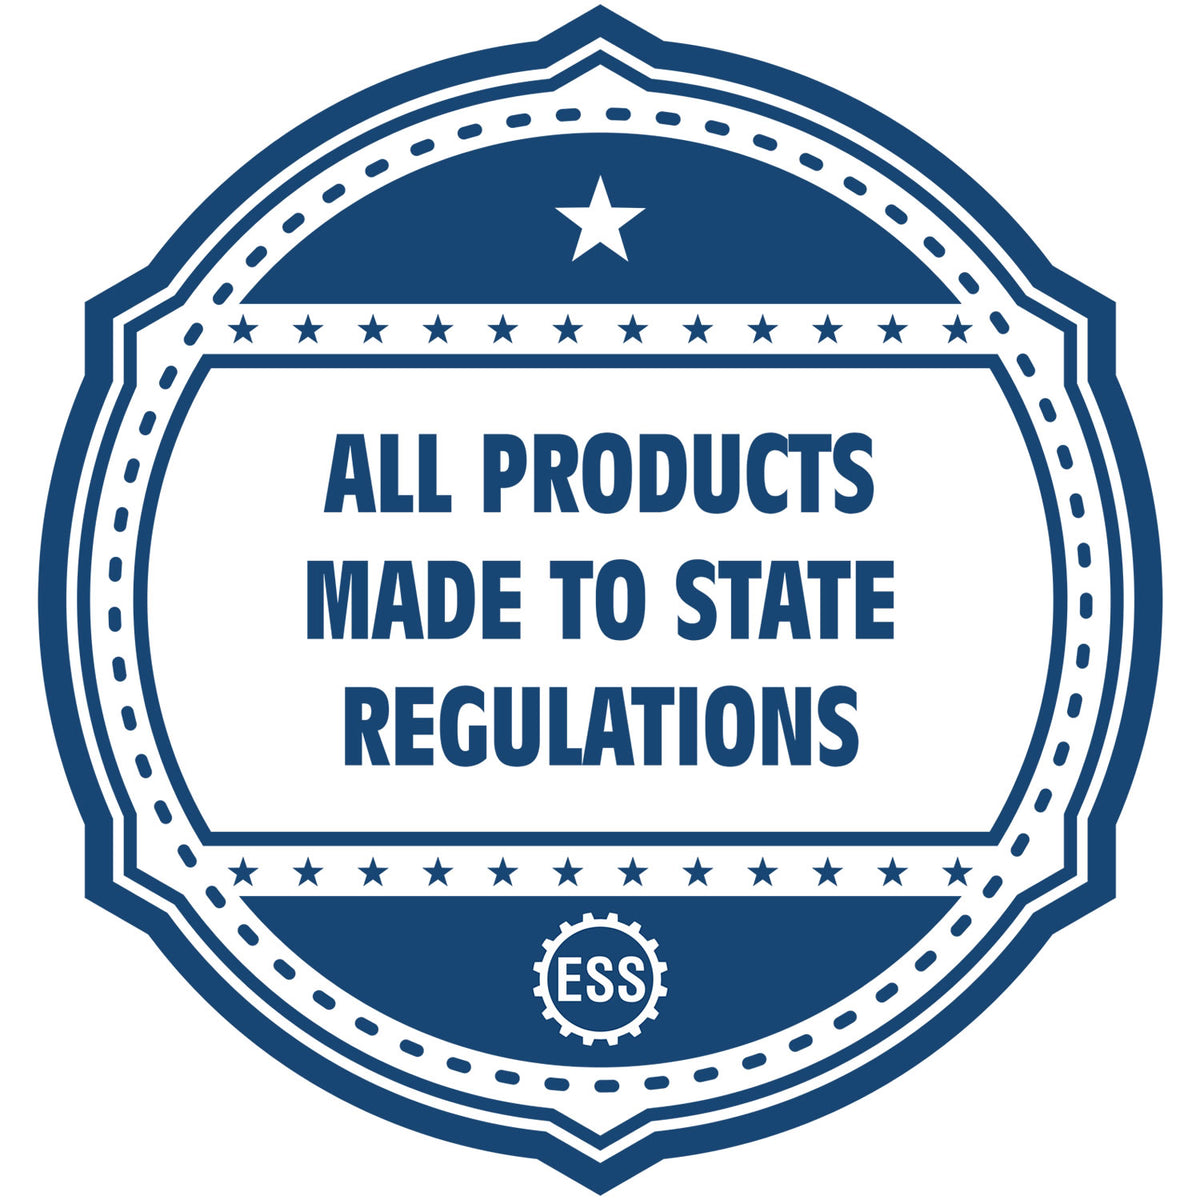 An icon or badge element for the Premium MaxLight Pre-Inked Colorado Engineering Stamp showing that this product is made in compliance with state regulations.